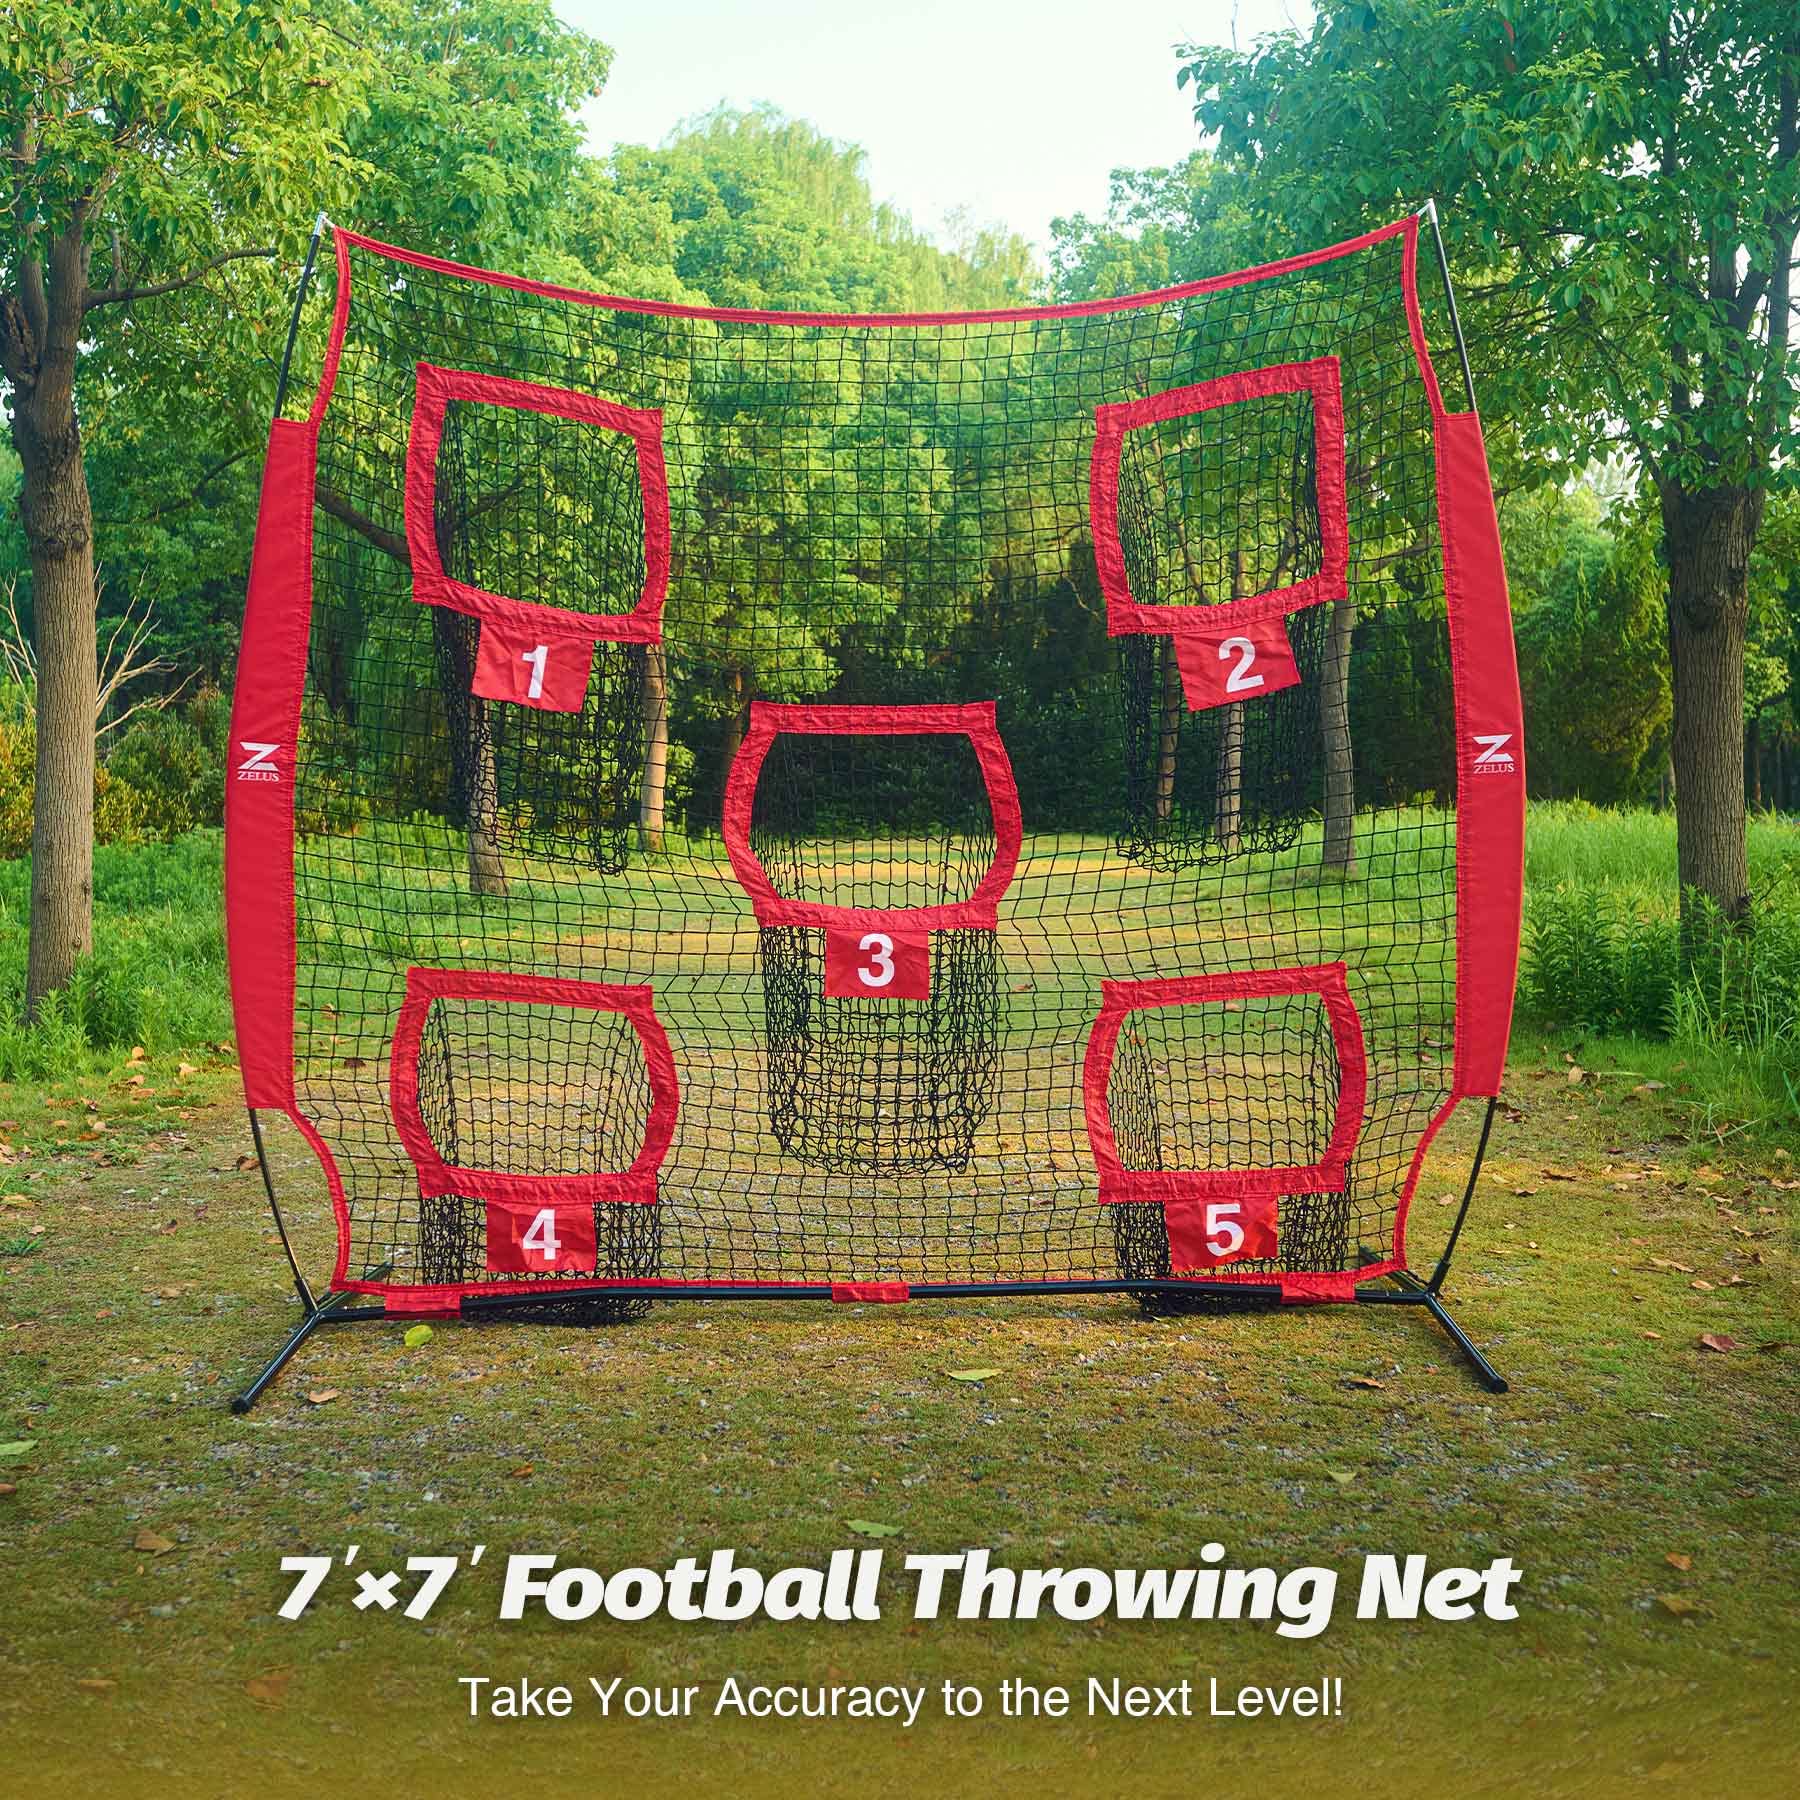 ZELUS 7 x 7ft Football Trainer Throwing Net | Training Throwing Target Practice with 5 Throwing Targets | Great for Quarterback | Includes Carry Bag